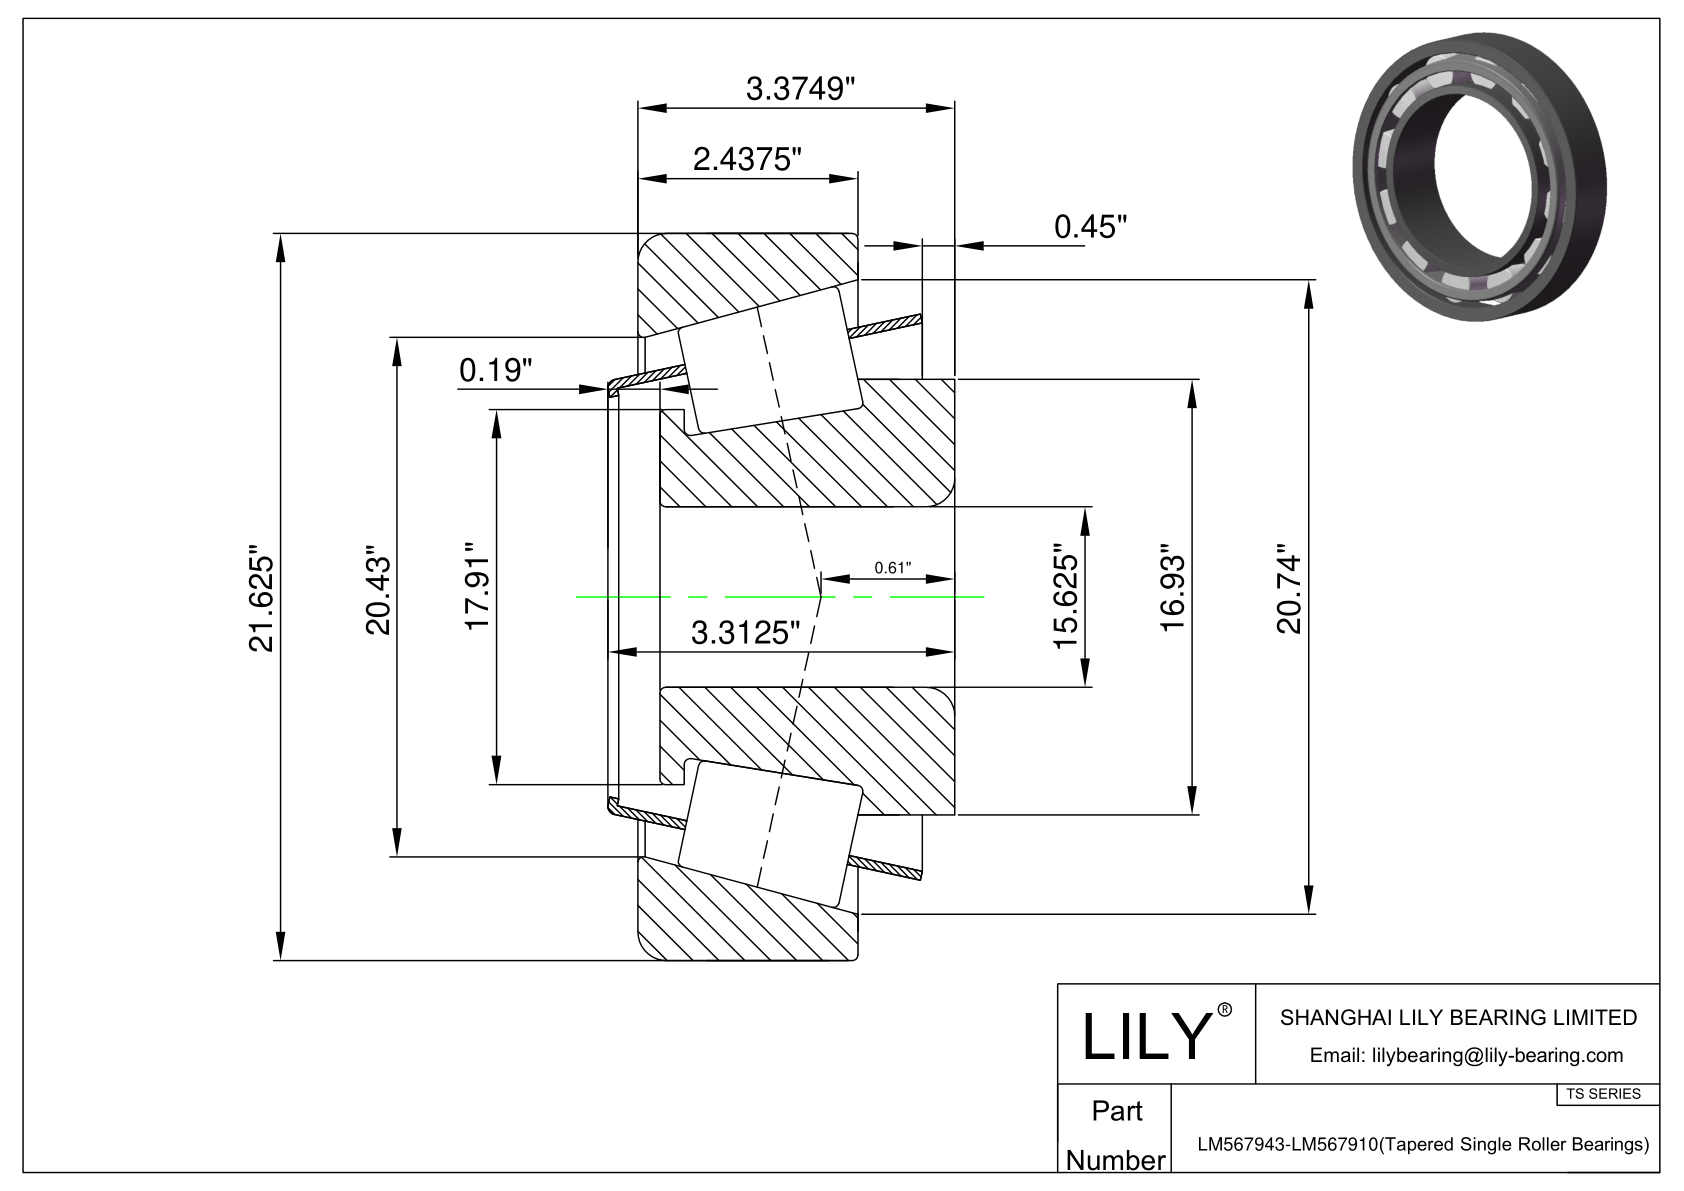 LM567943-LM567910 TS (Tapered Single Roller Bearings) (Imperial) cad drawing